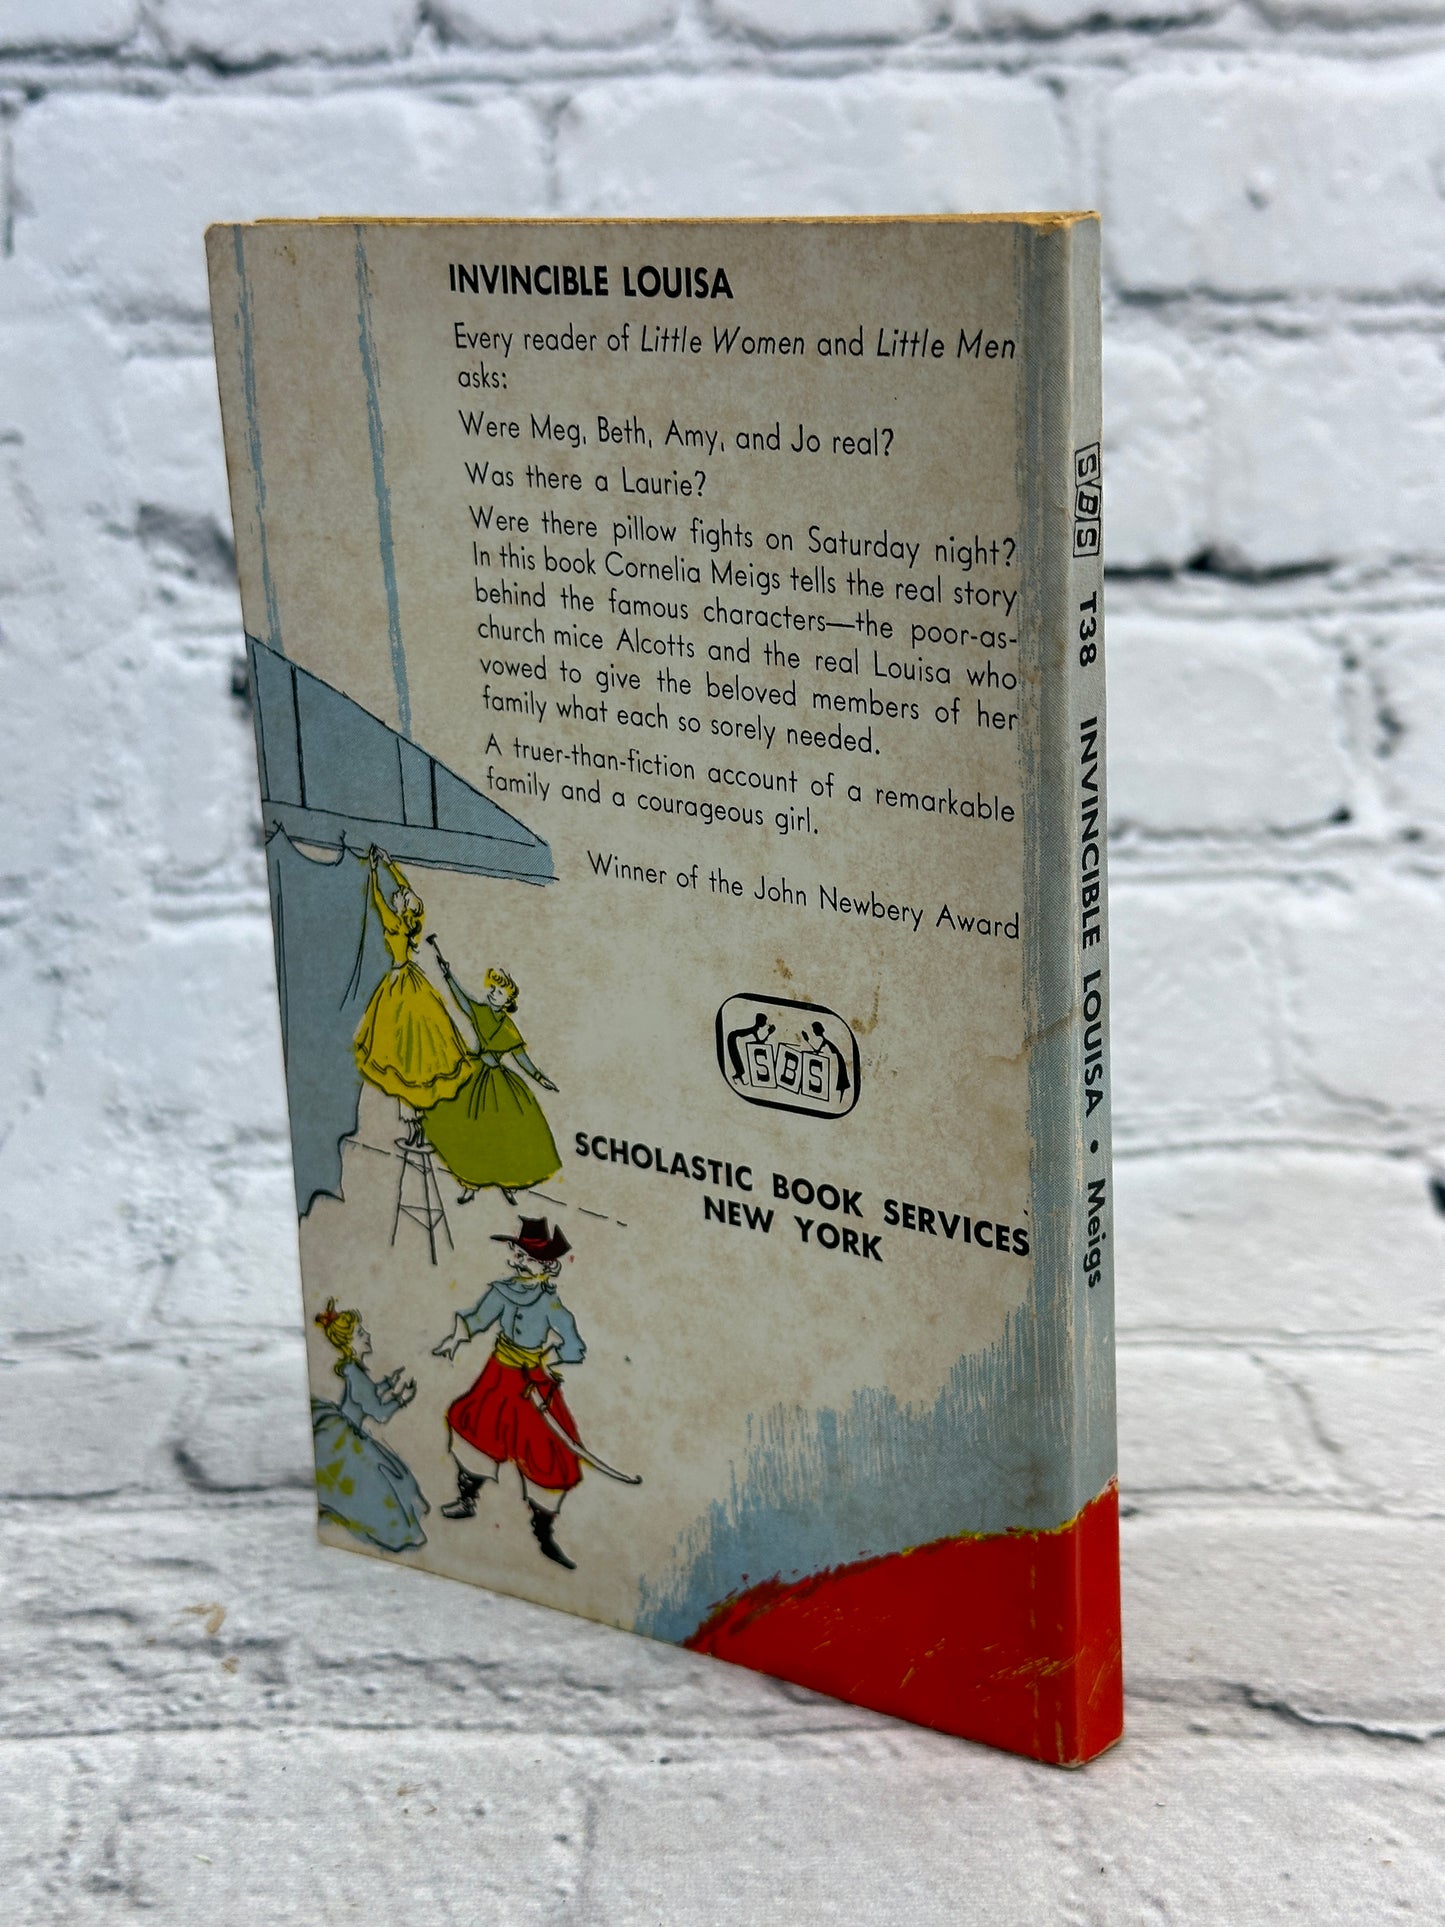 Invincible Louisa by Cornelia Meigs: The Story of..[1967 · 7th Printing]